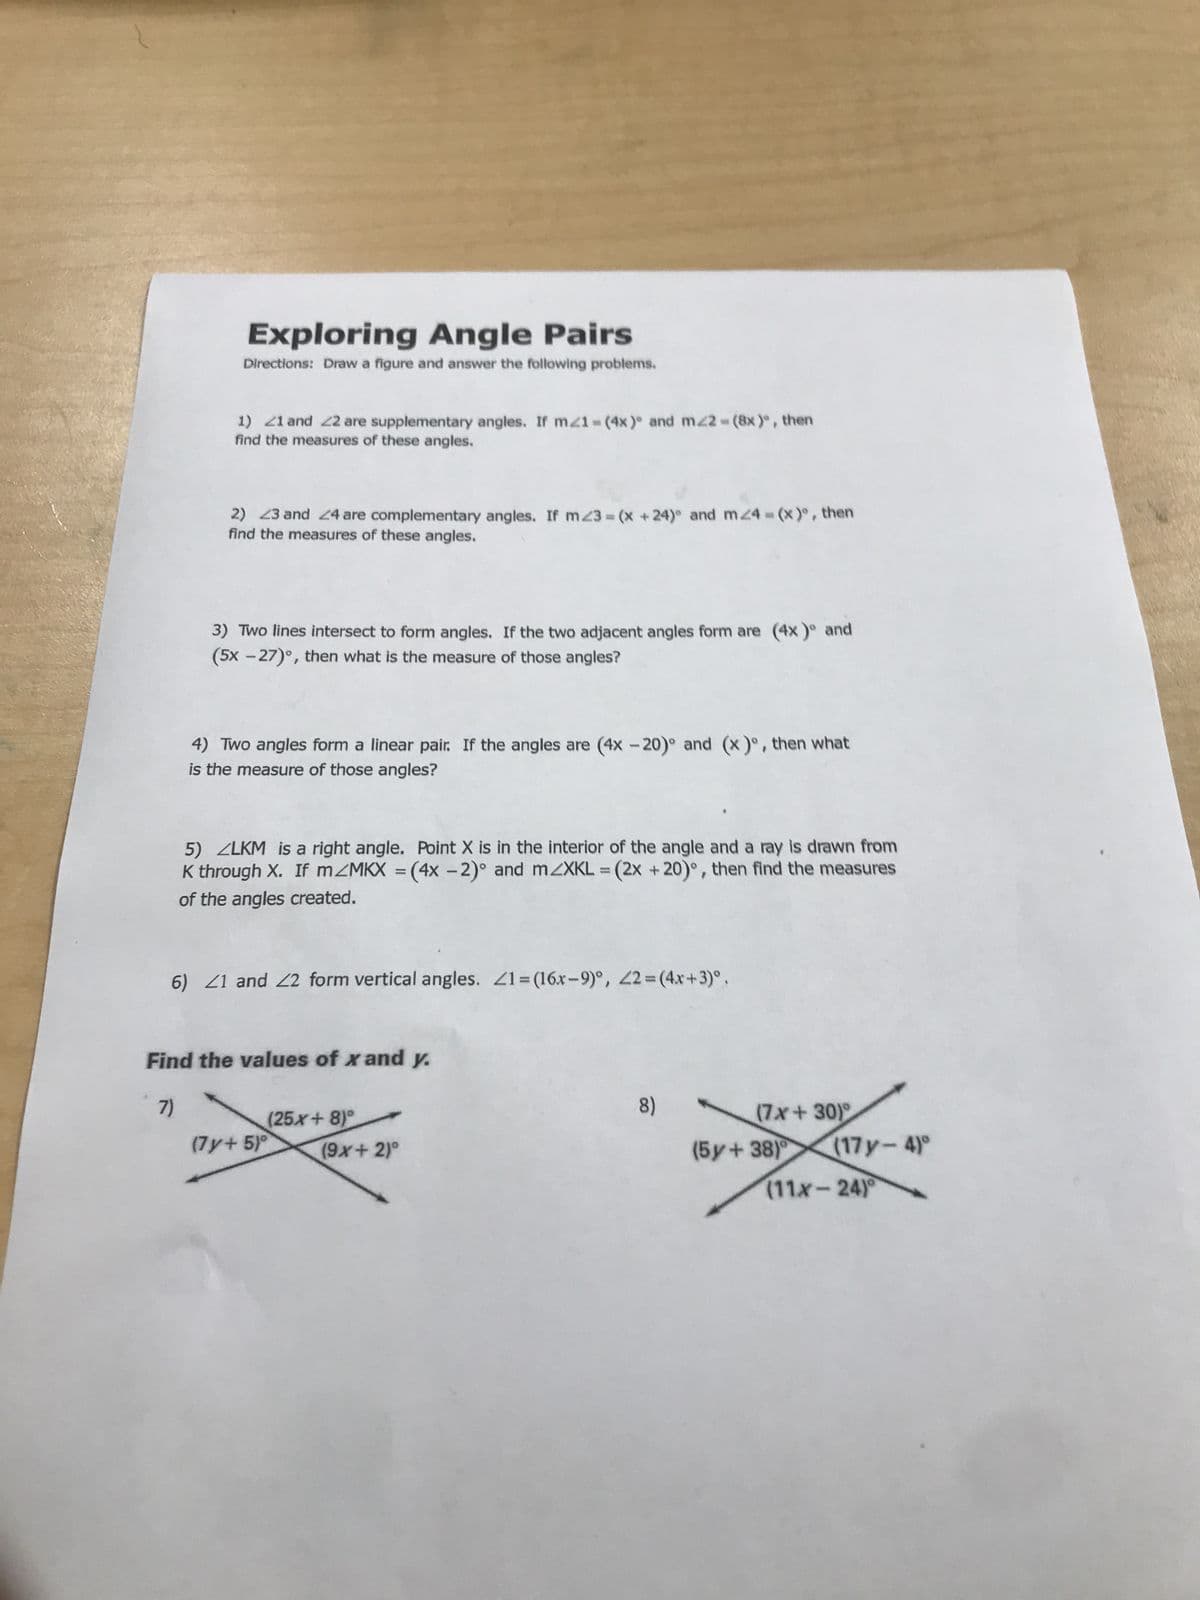 Exploring Angle Pairs
Directions: Draw a figure and answer the following problems.
1) 21 and 22 are supplementary angles. If m21-(4x) and m22-(8x), then
find the measures of these angles.
2) 23 and 24 are complementary angles. If m23=(x +24) and m<4=(x)°, then
find the measures of these angles.
3) Two lines intersect to form angles. If the two adjacent angles form are (4x)° and
(5x-27)°, then what is the measure of those angles?
4) Two angles form a linear pair. If the angles are (4x -20) and (x)⁰, then what
is the measure of those angles?
5) ZLKM is a right angle. Point X is in the interior of the angle and a ray is drawn from
K through X. If mZMKX = (4x - 2)° and mZXKL = (2x +20)°, then find the measures
of the angles created.
6) 21 and 22 form vertical angles. 21=(16x-9)°, 22= (4x+3)°.
Find the values of x and y.
7)
(25x+8)
(7y+5)°
(9x + 2)°
8)
(7x+30)
(5y+38) (17y-4)°
(11x-24)